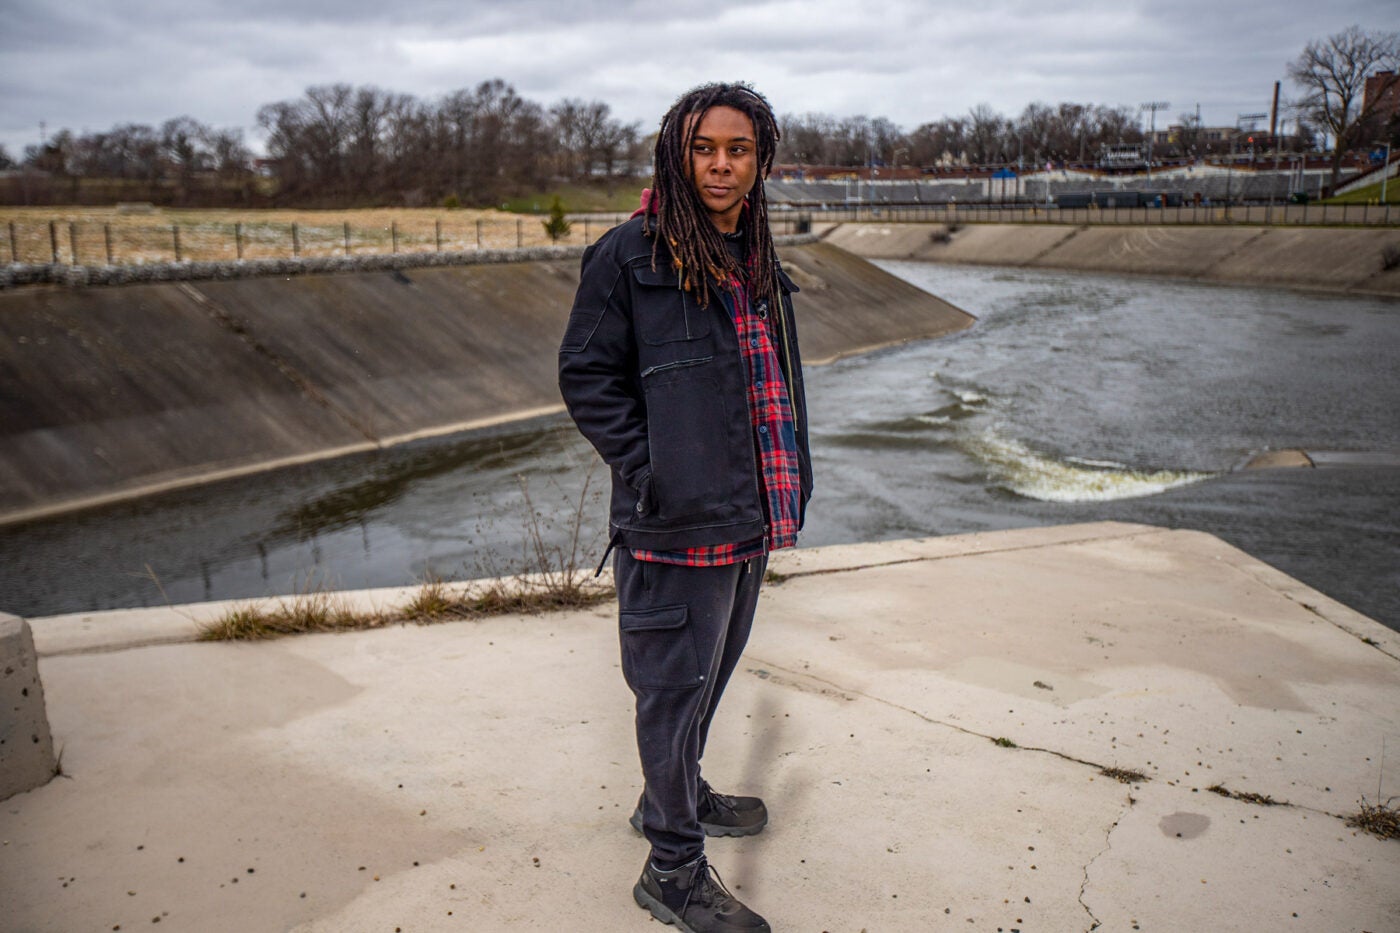 Marcell Simmons stands on a concrete ledge near the Flint River. He has his hands in his pockets and stares off camera left.